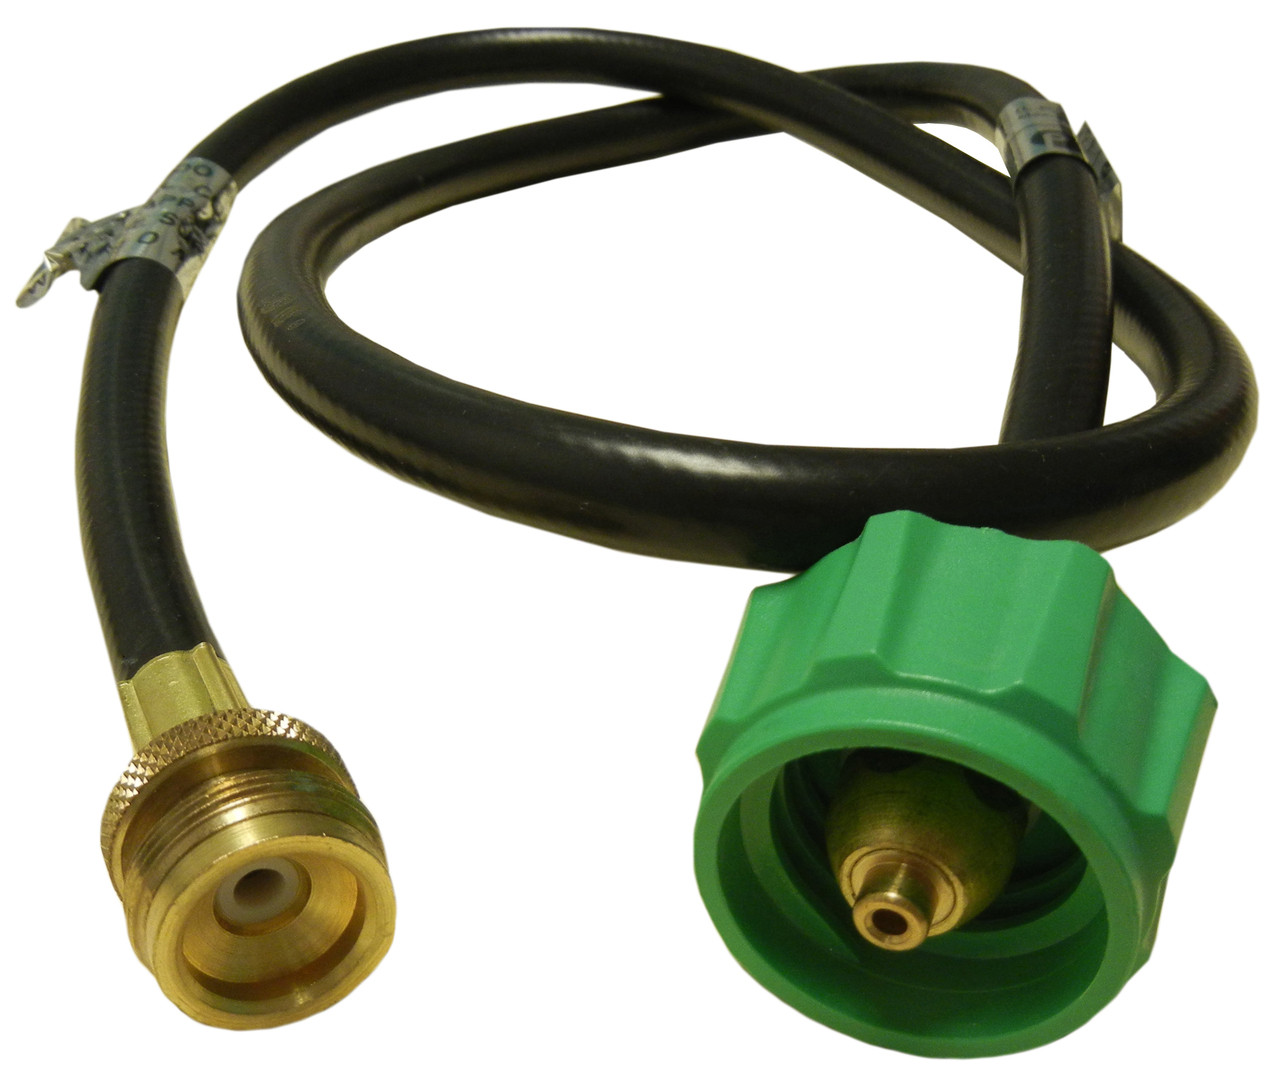 GasSaf 5FT Propane Adapter and Hose Assembly Replacement with Hose for Type1 LP Tank and Gas Grill-CSA Certified 2-Pack